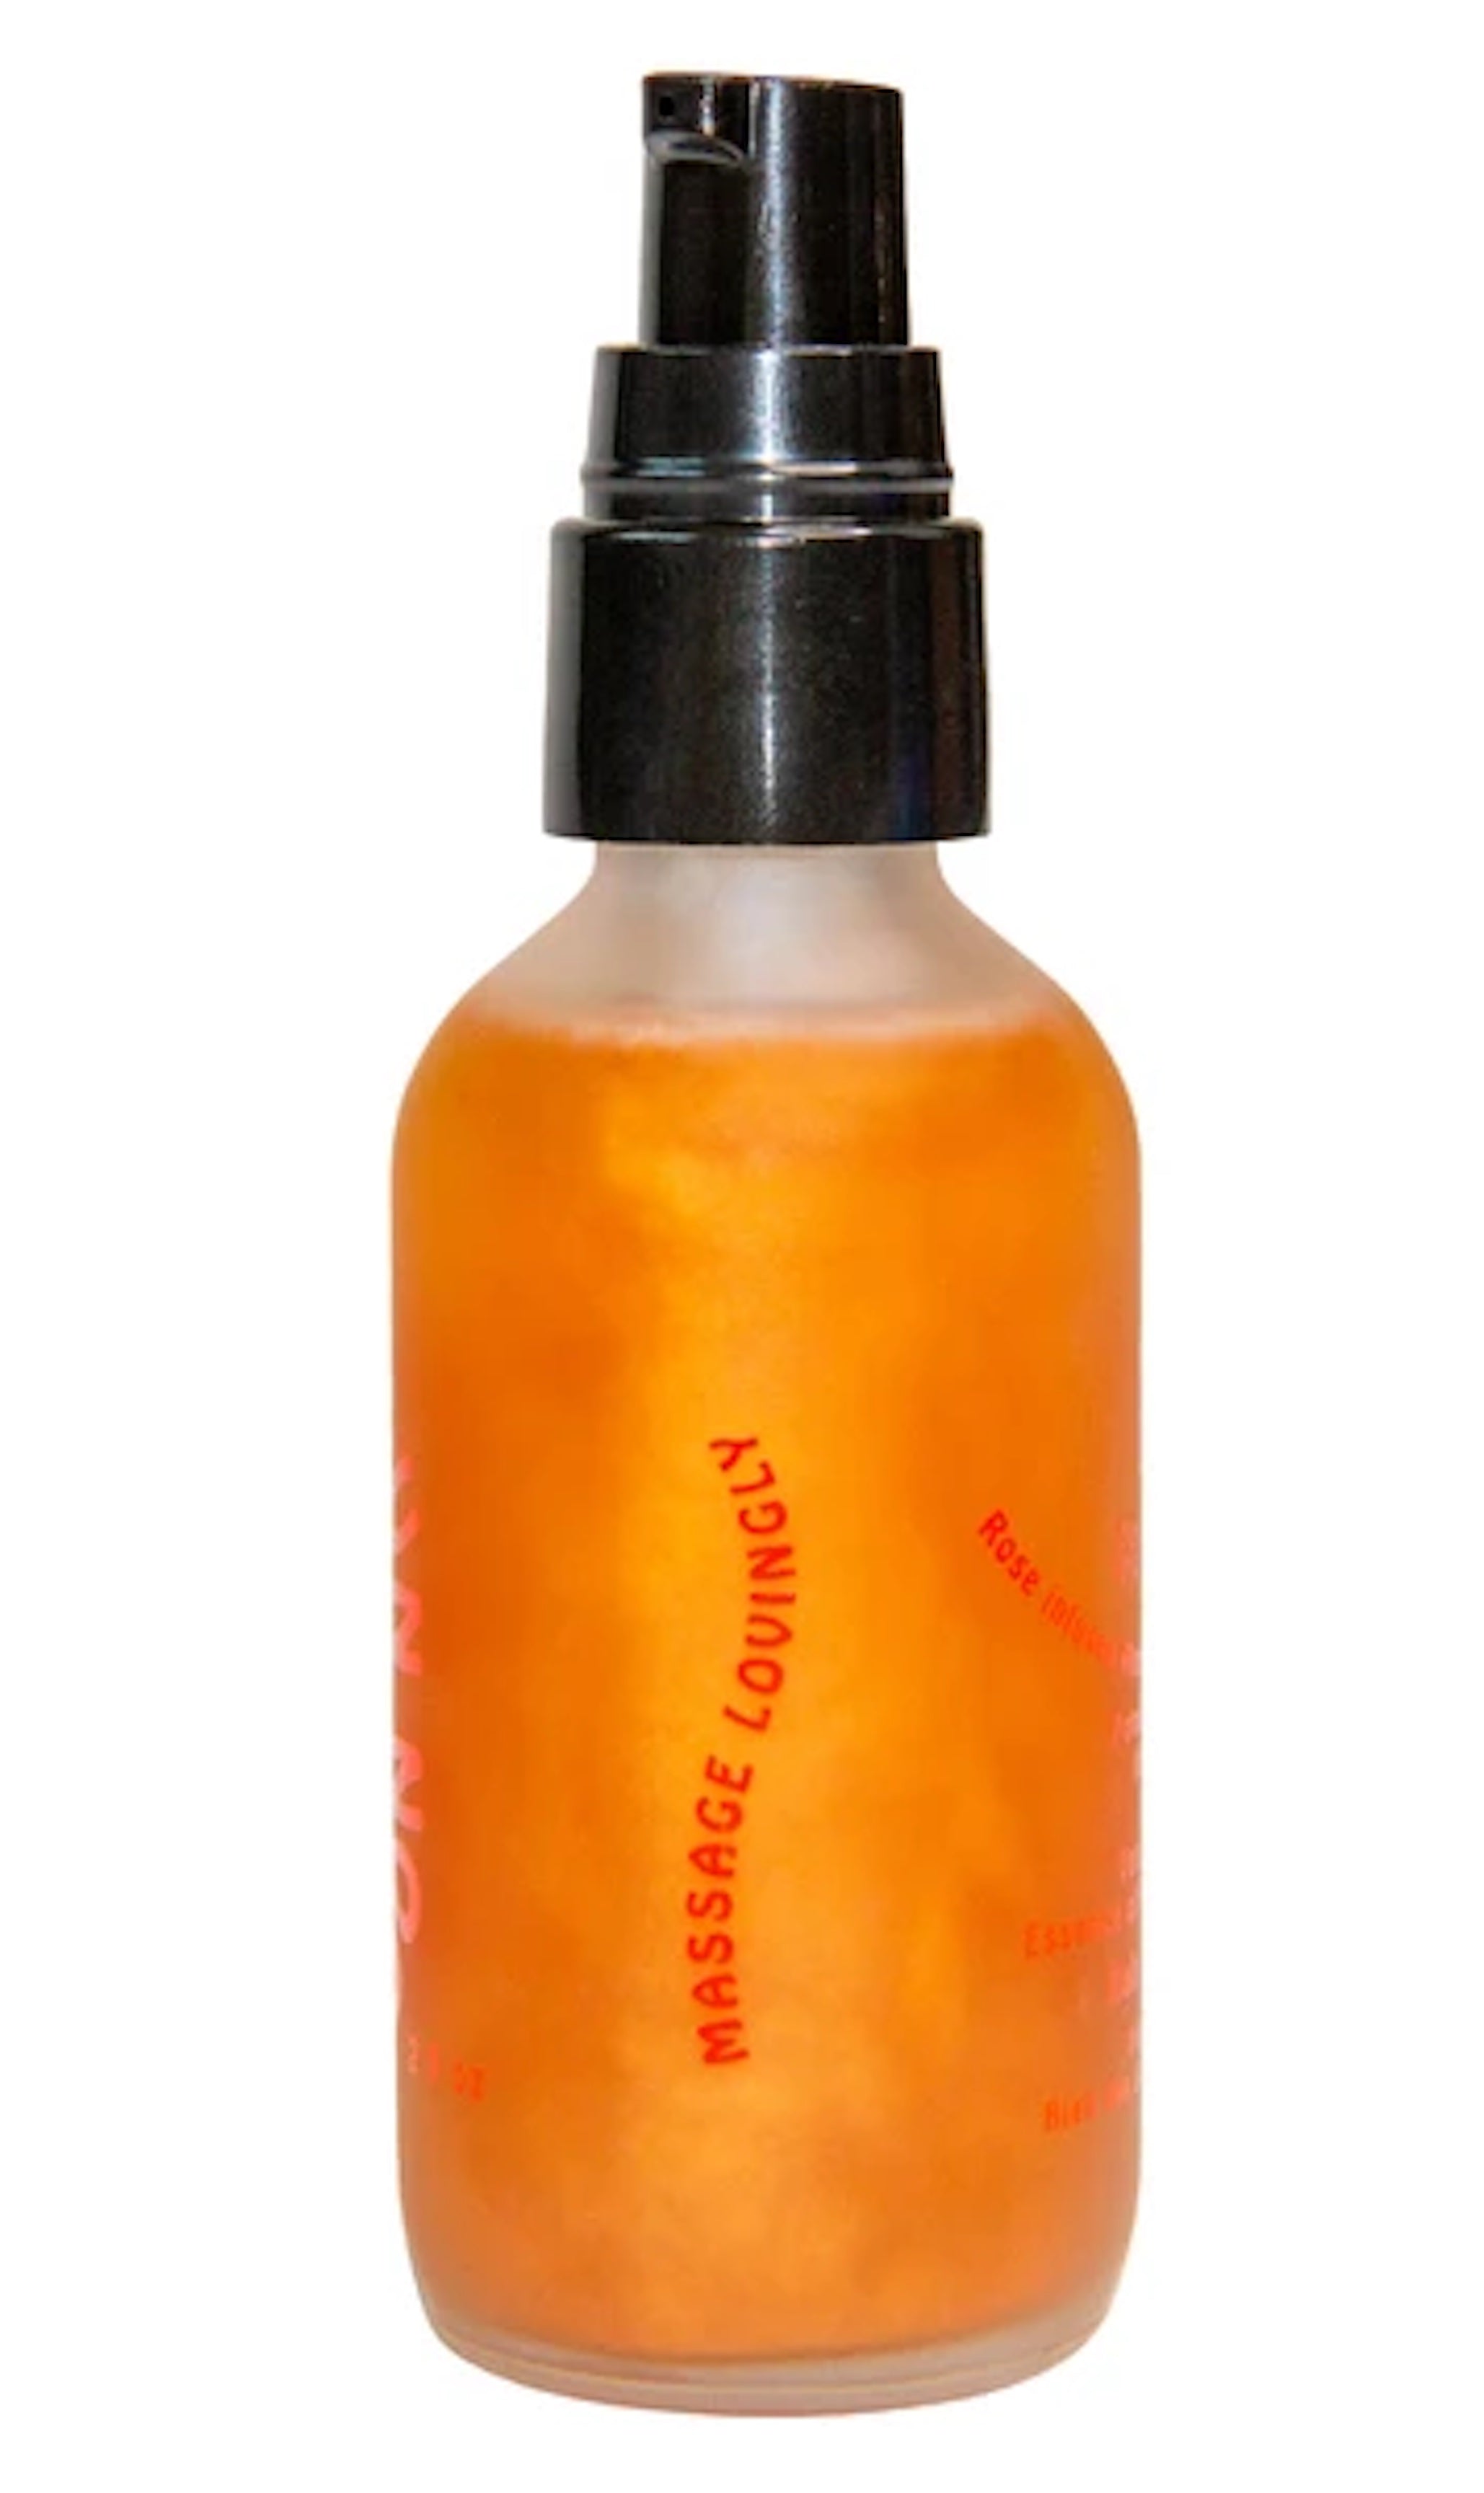 orange massage oil from high sun low moon depicted with message "massage lovingly"